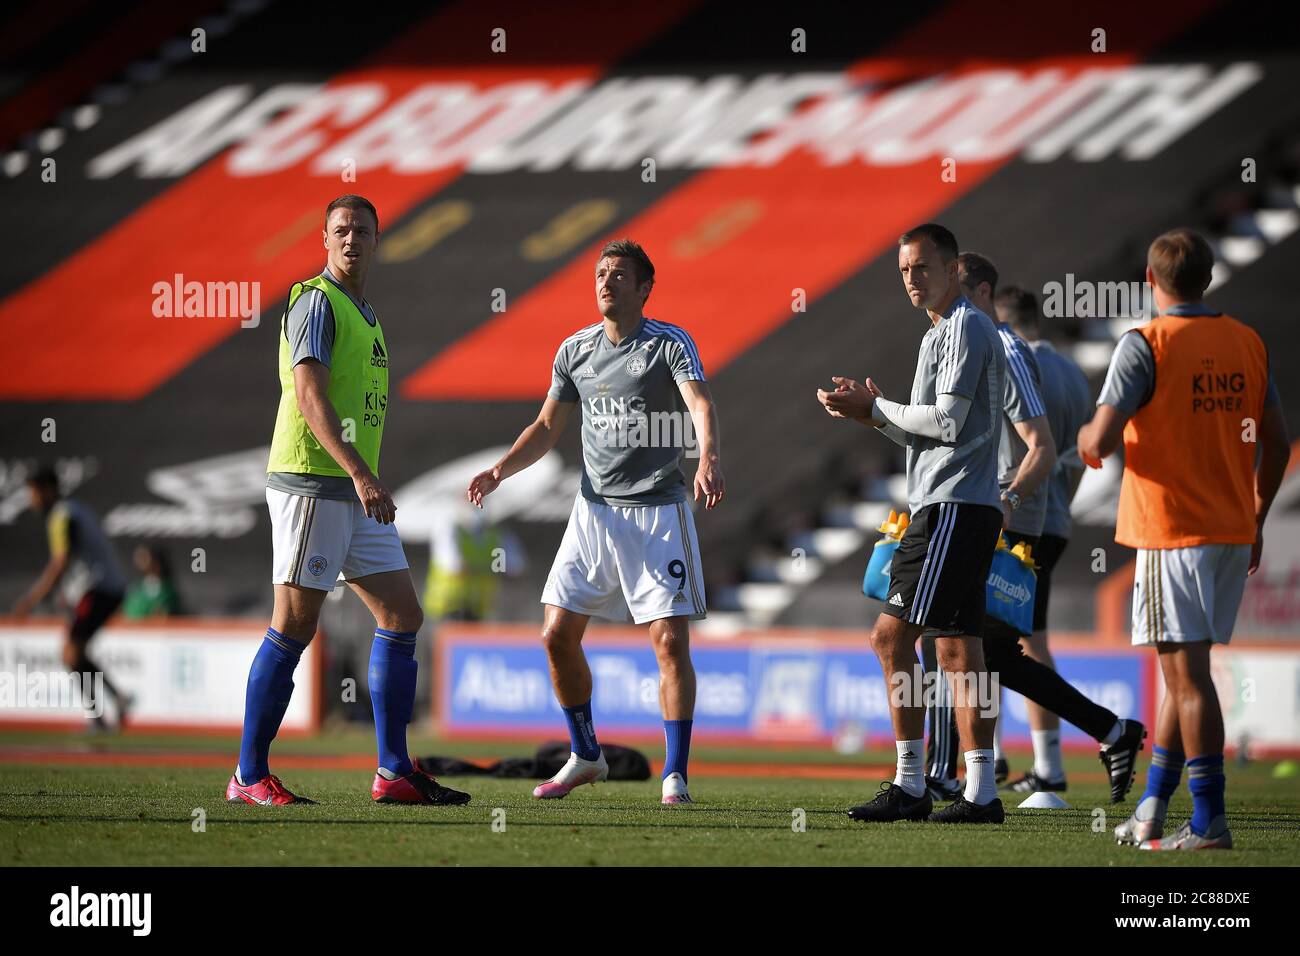 Jamie Vardy of Leicester City warms up with team mates ahead of the match - AFC Bournemouth v Leicester City, Premier League, Vitality Stadium, Bournemouth, UK - 12th July 2020  Editorial Use Only - DataCo restrictions apply Stock Photo